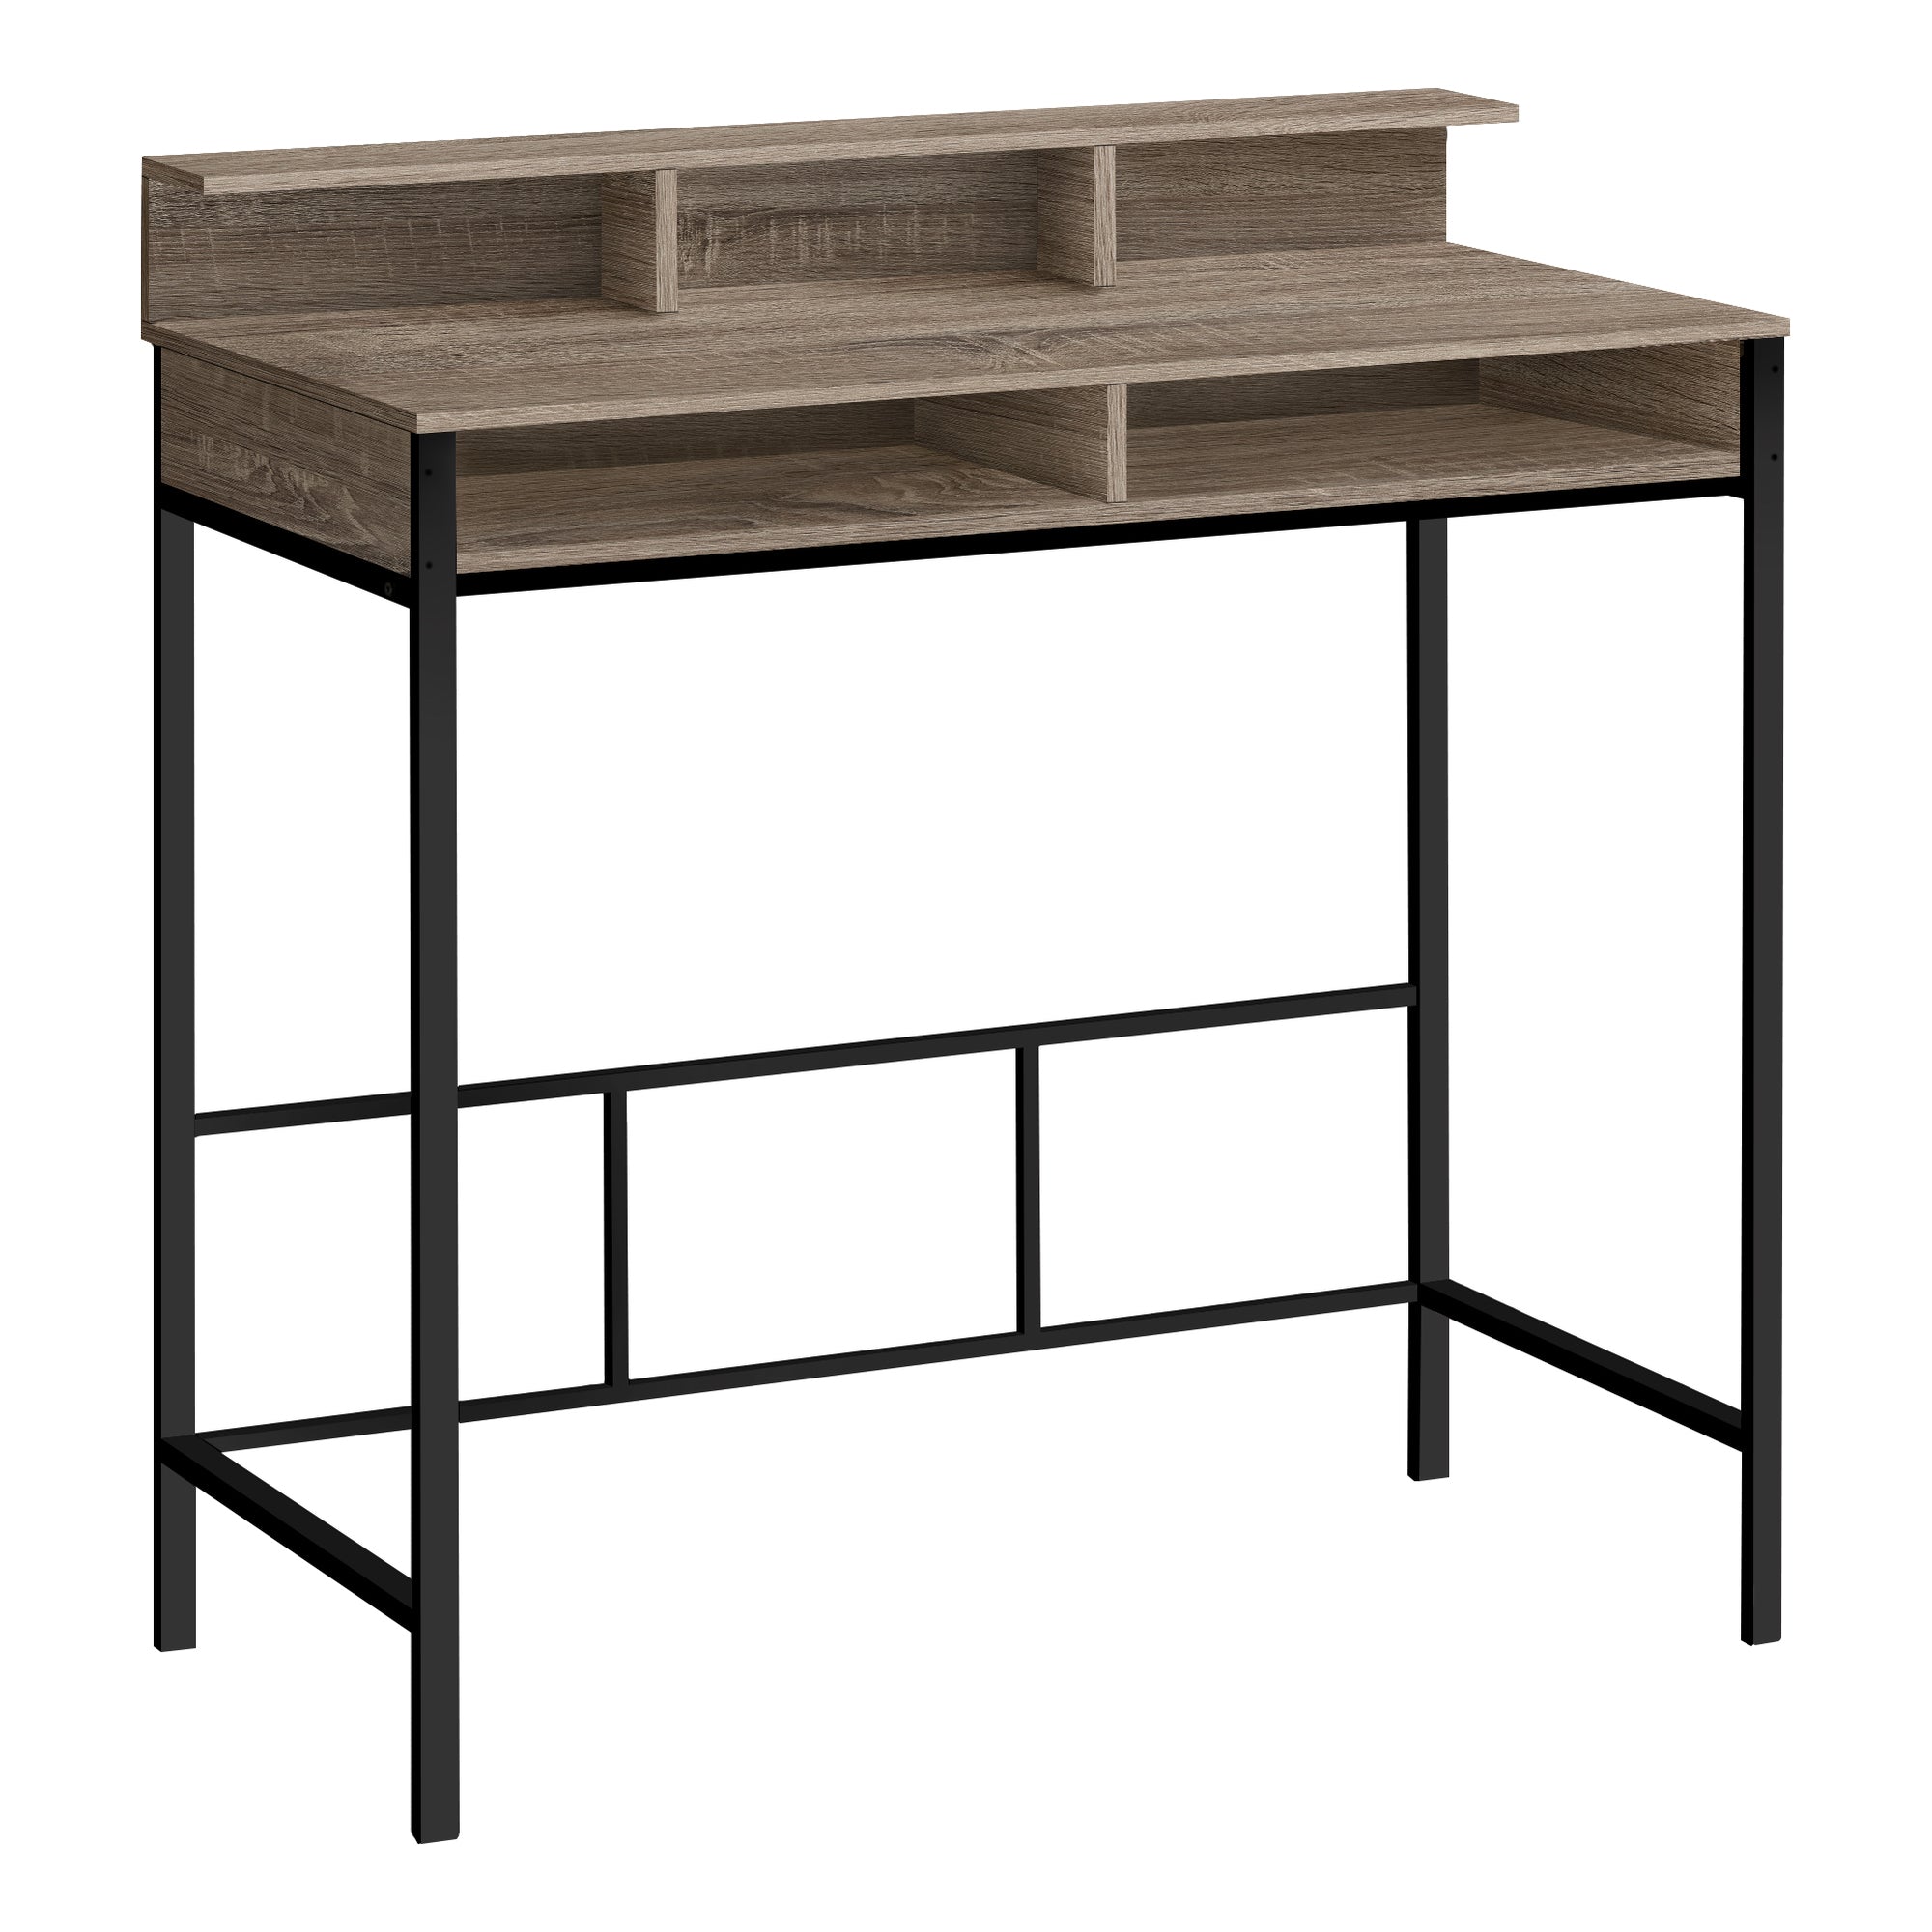 MN-857702    Computer Desk, Home Office, Standing, Storage Shelves, 48"L, Metal Legs, Laminate, Dark Taupe, Contemporary, Industrial, Modern